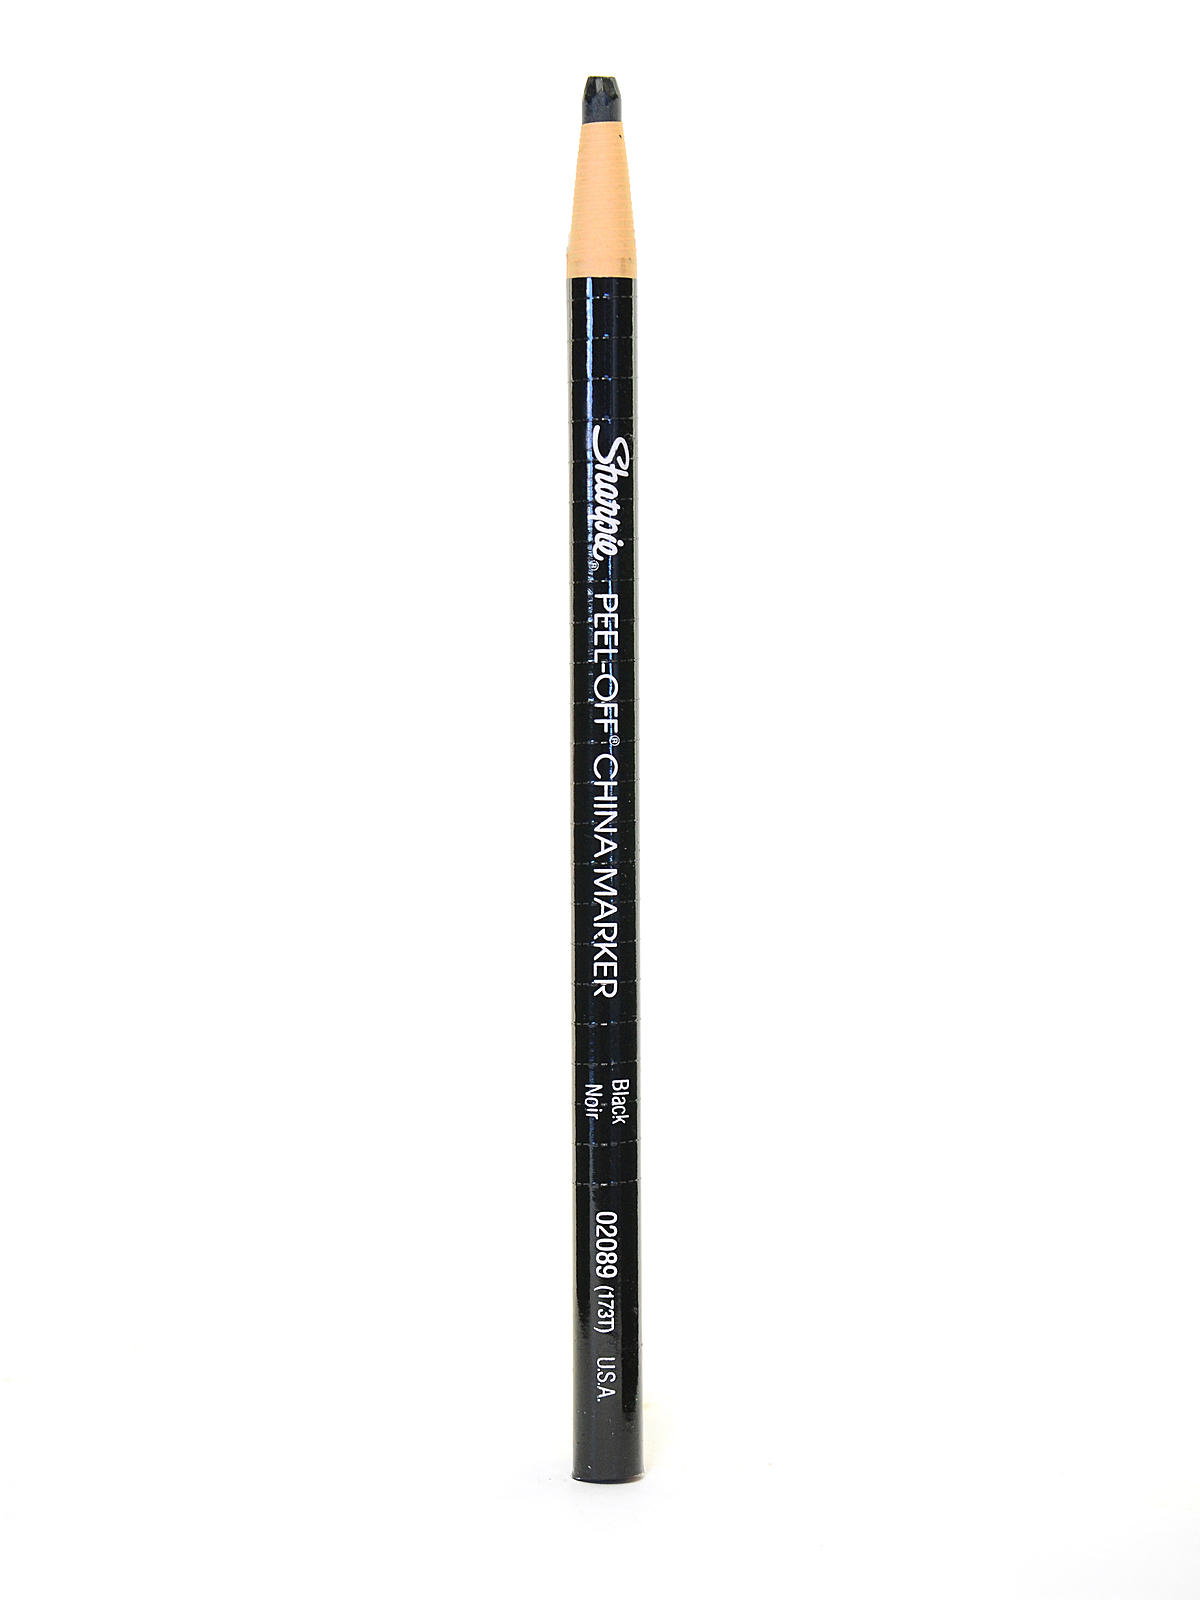  SHARPIE Peel-Off China Marker Grease Pencils, Black, Box of 12  : Black China Markers : Office Products